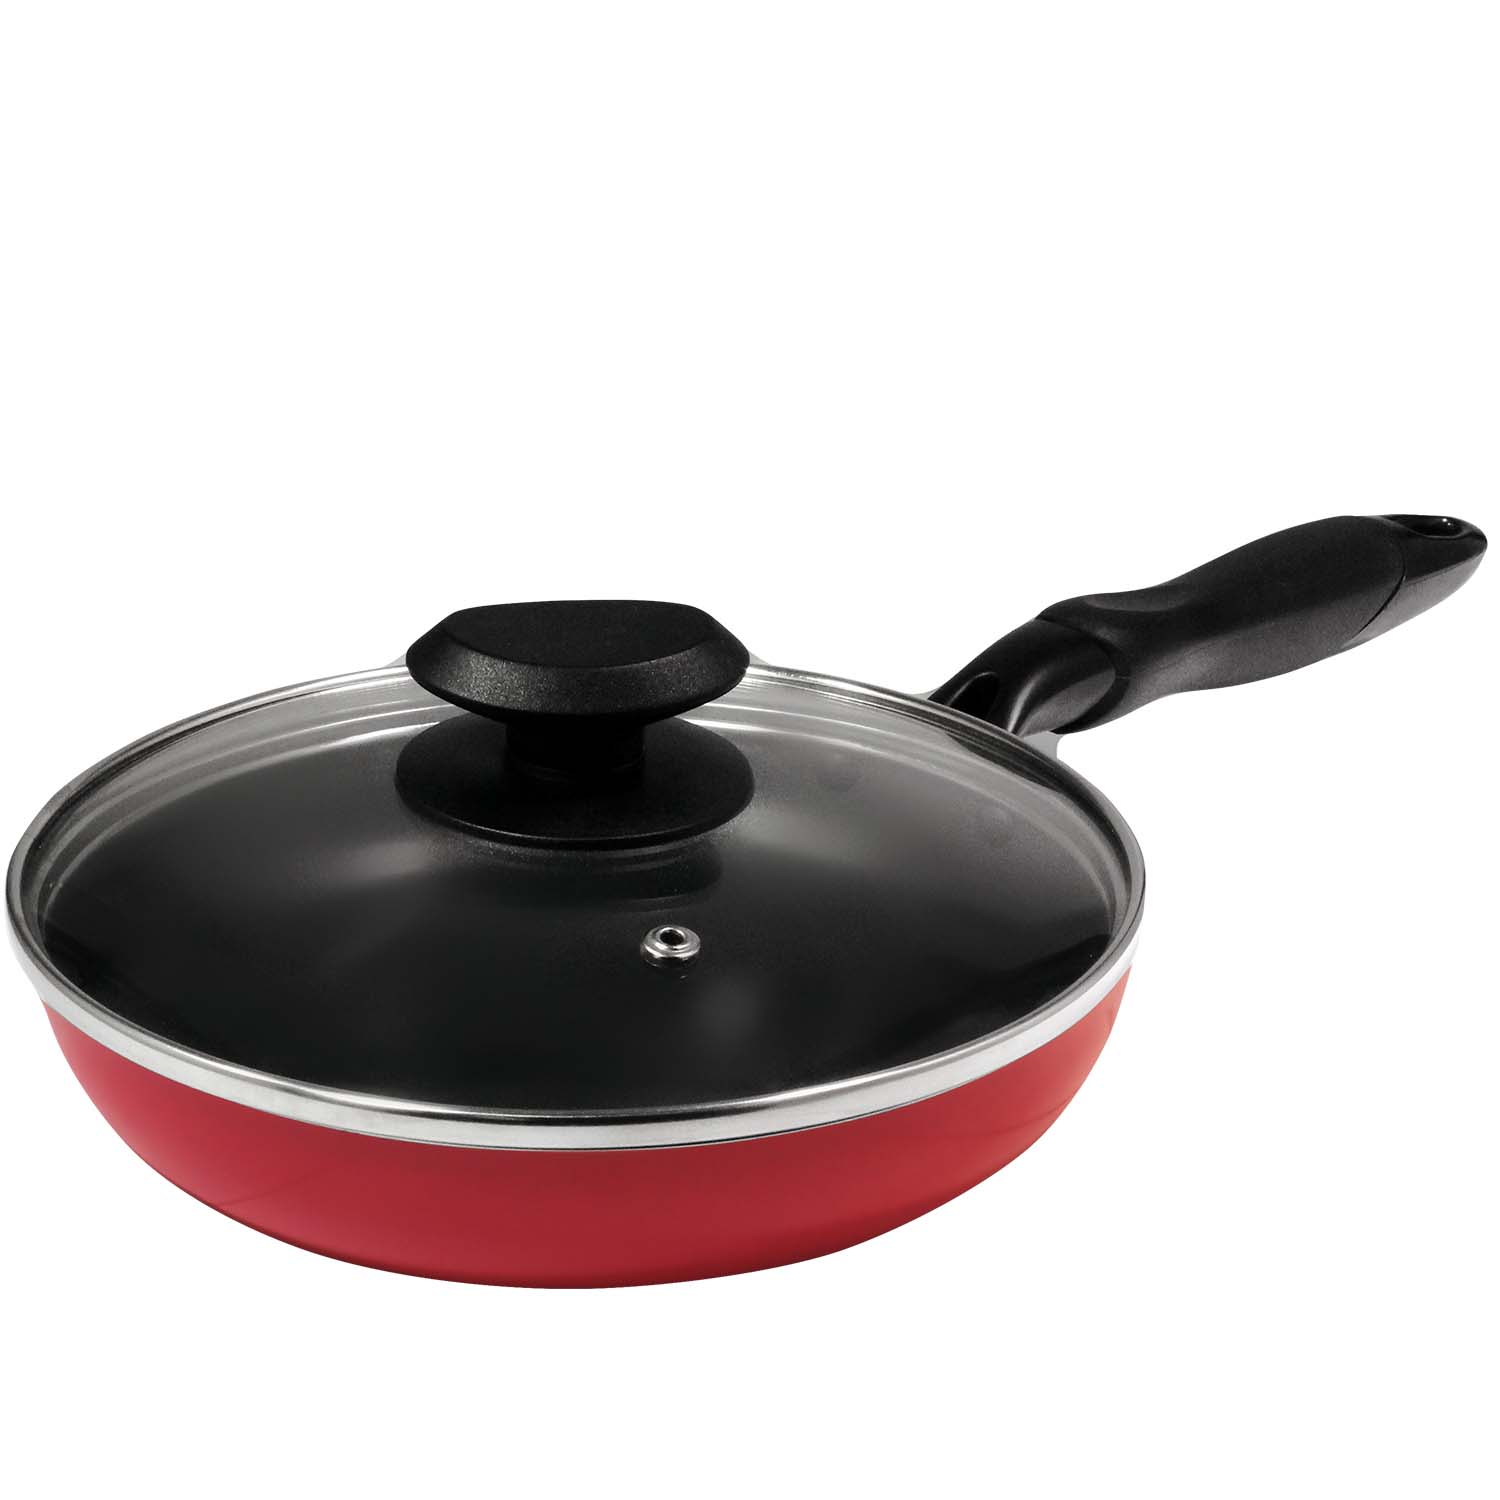 Non Stick Pan With Glass Lid | peacecommission.kdsg.gov.ng